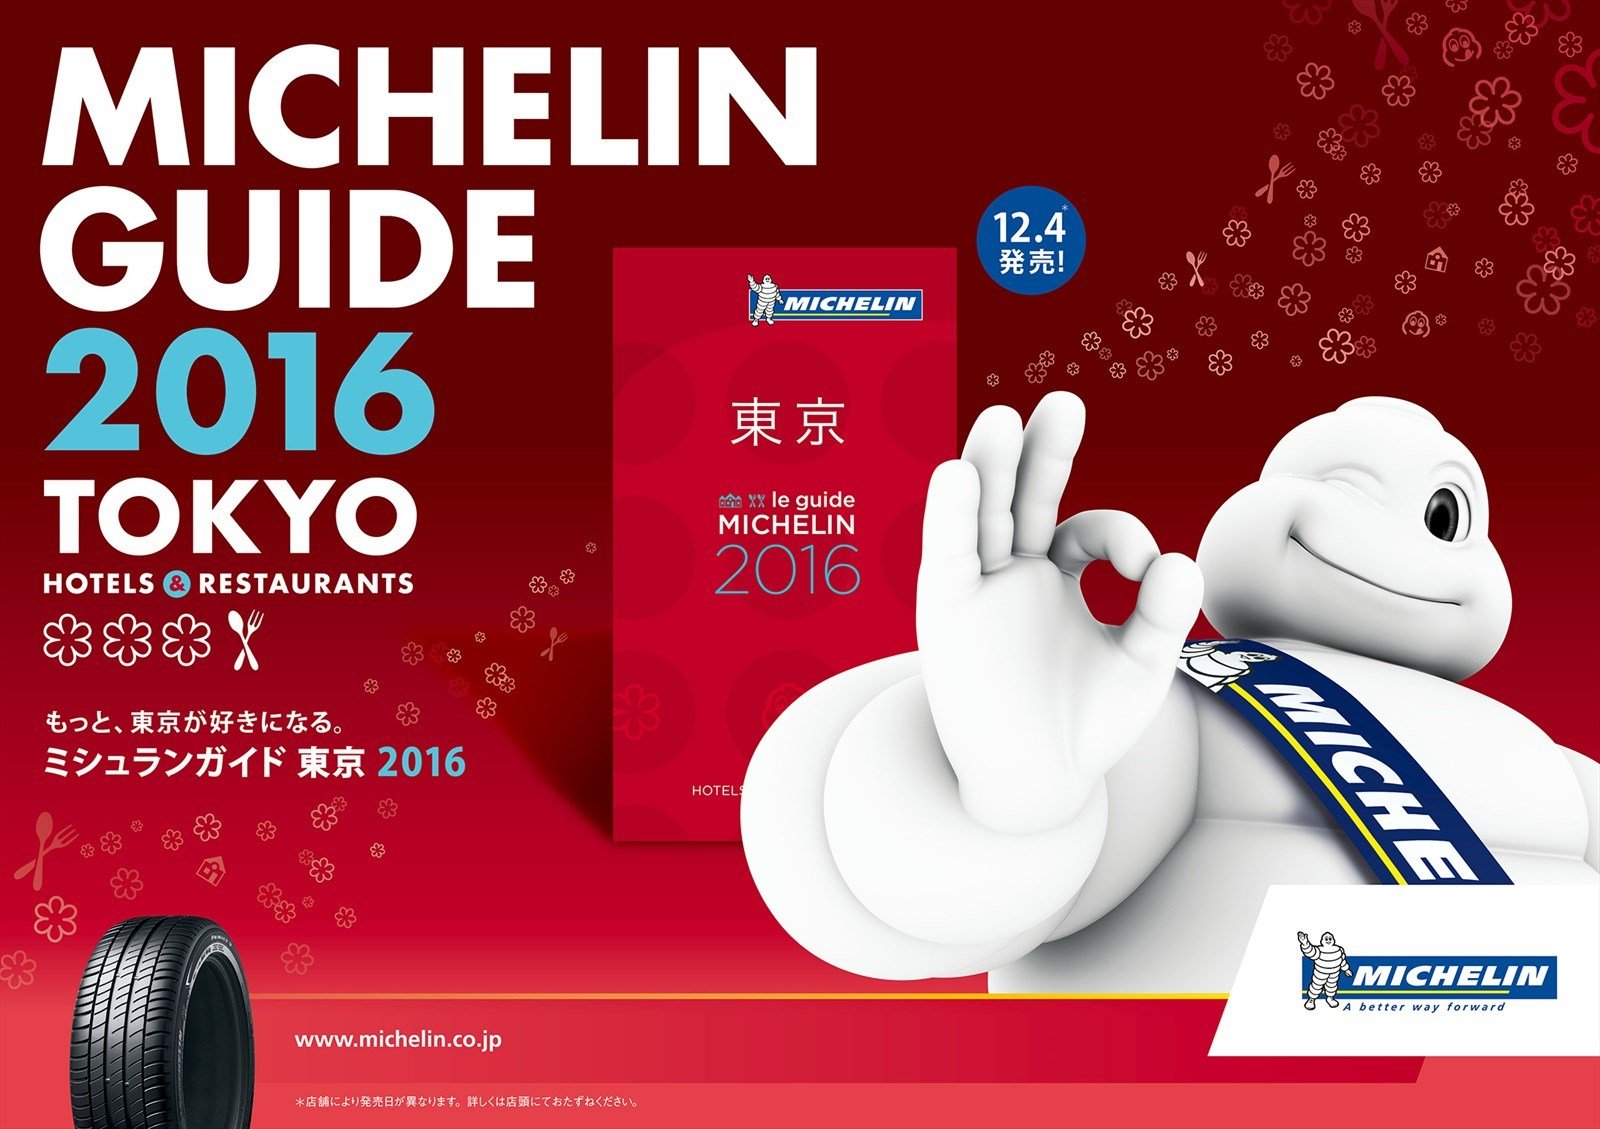 The Michelin Guide: Stars - The Cuisine Network